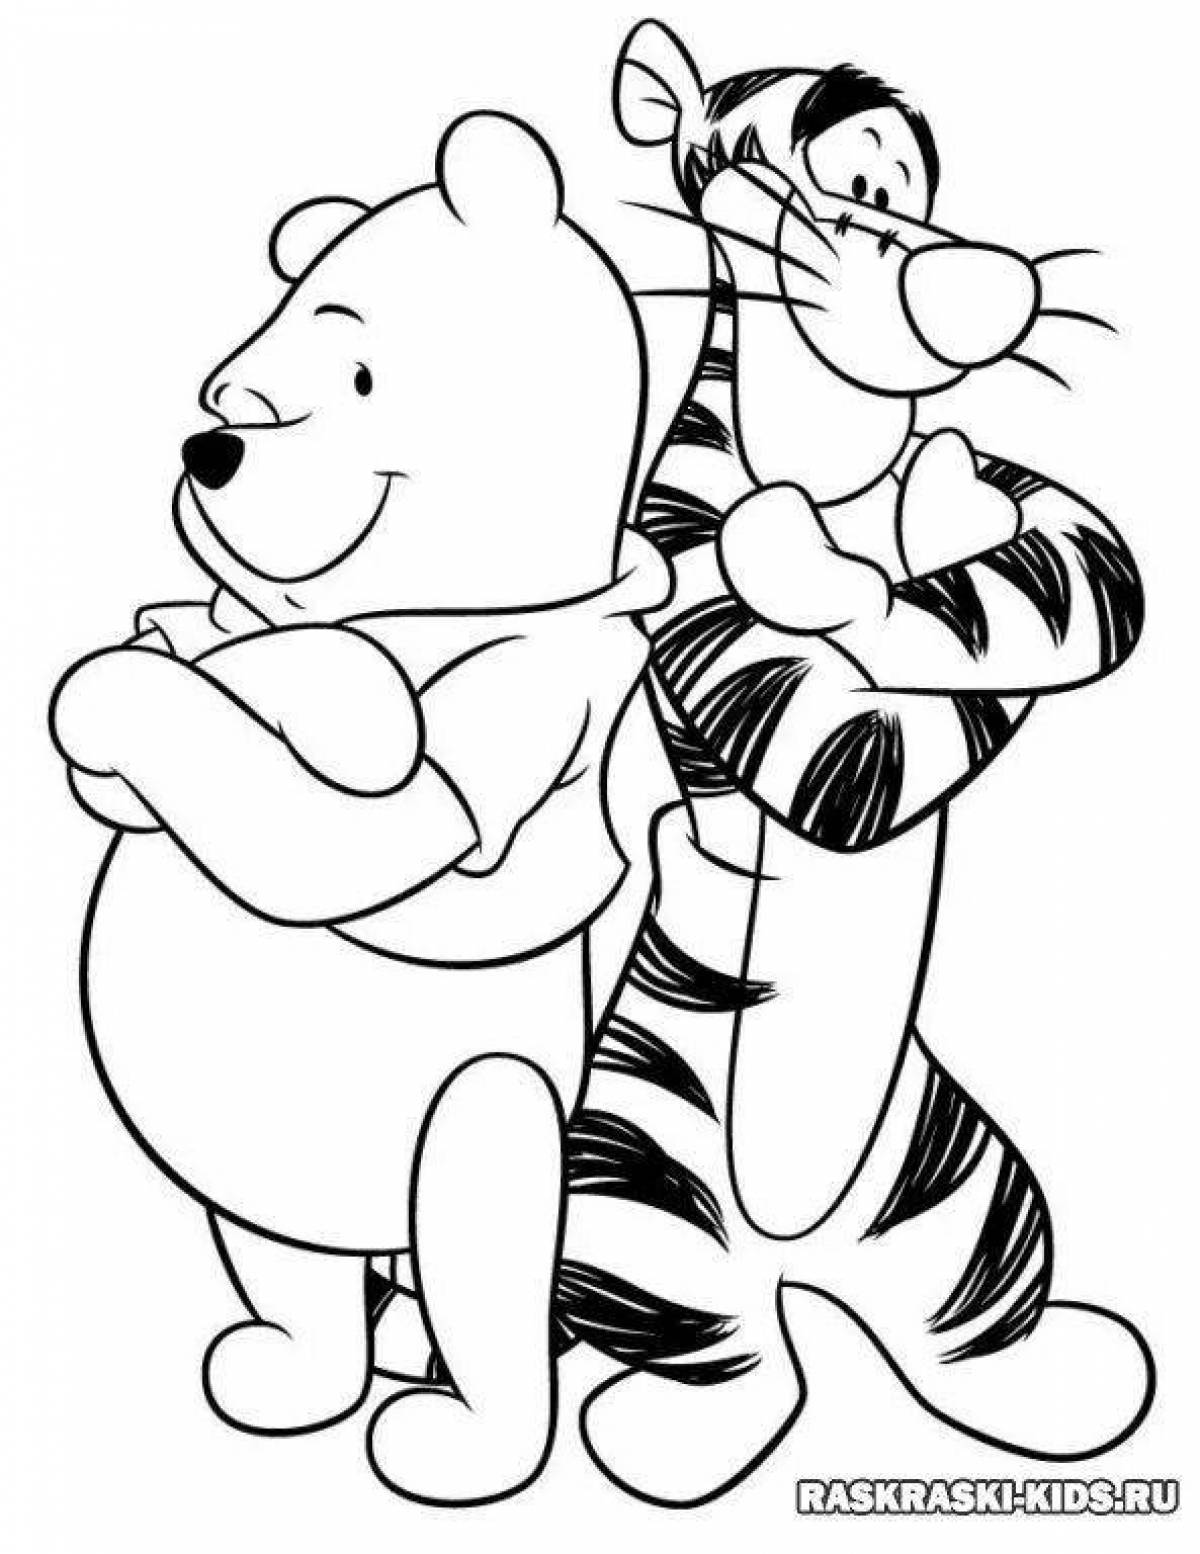 Exciting winnie the pooh coloring book